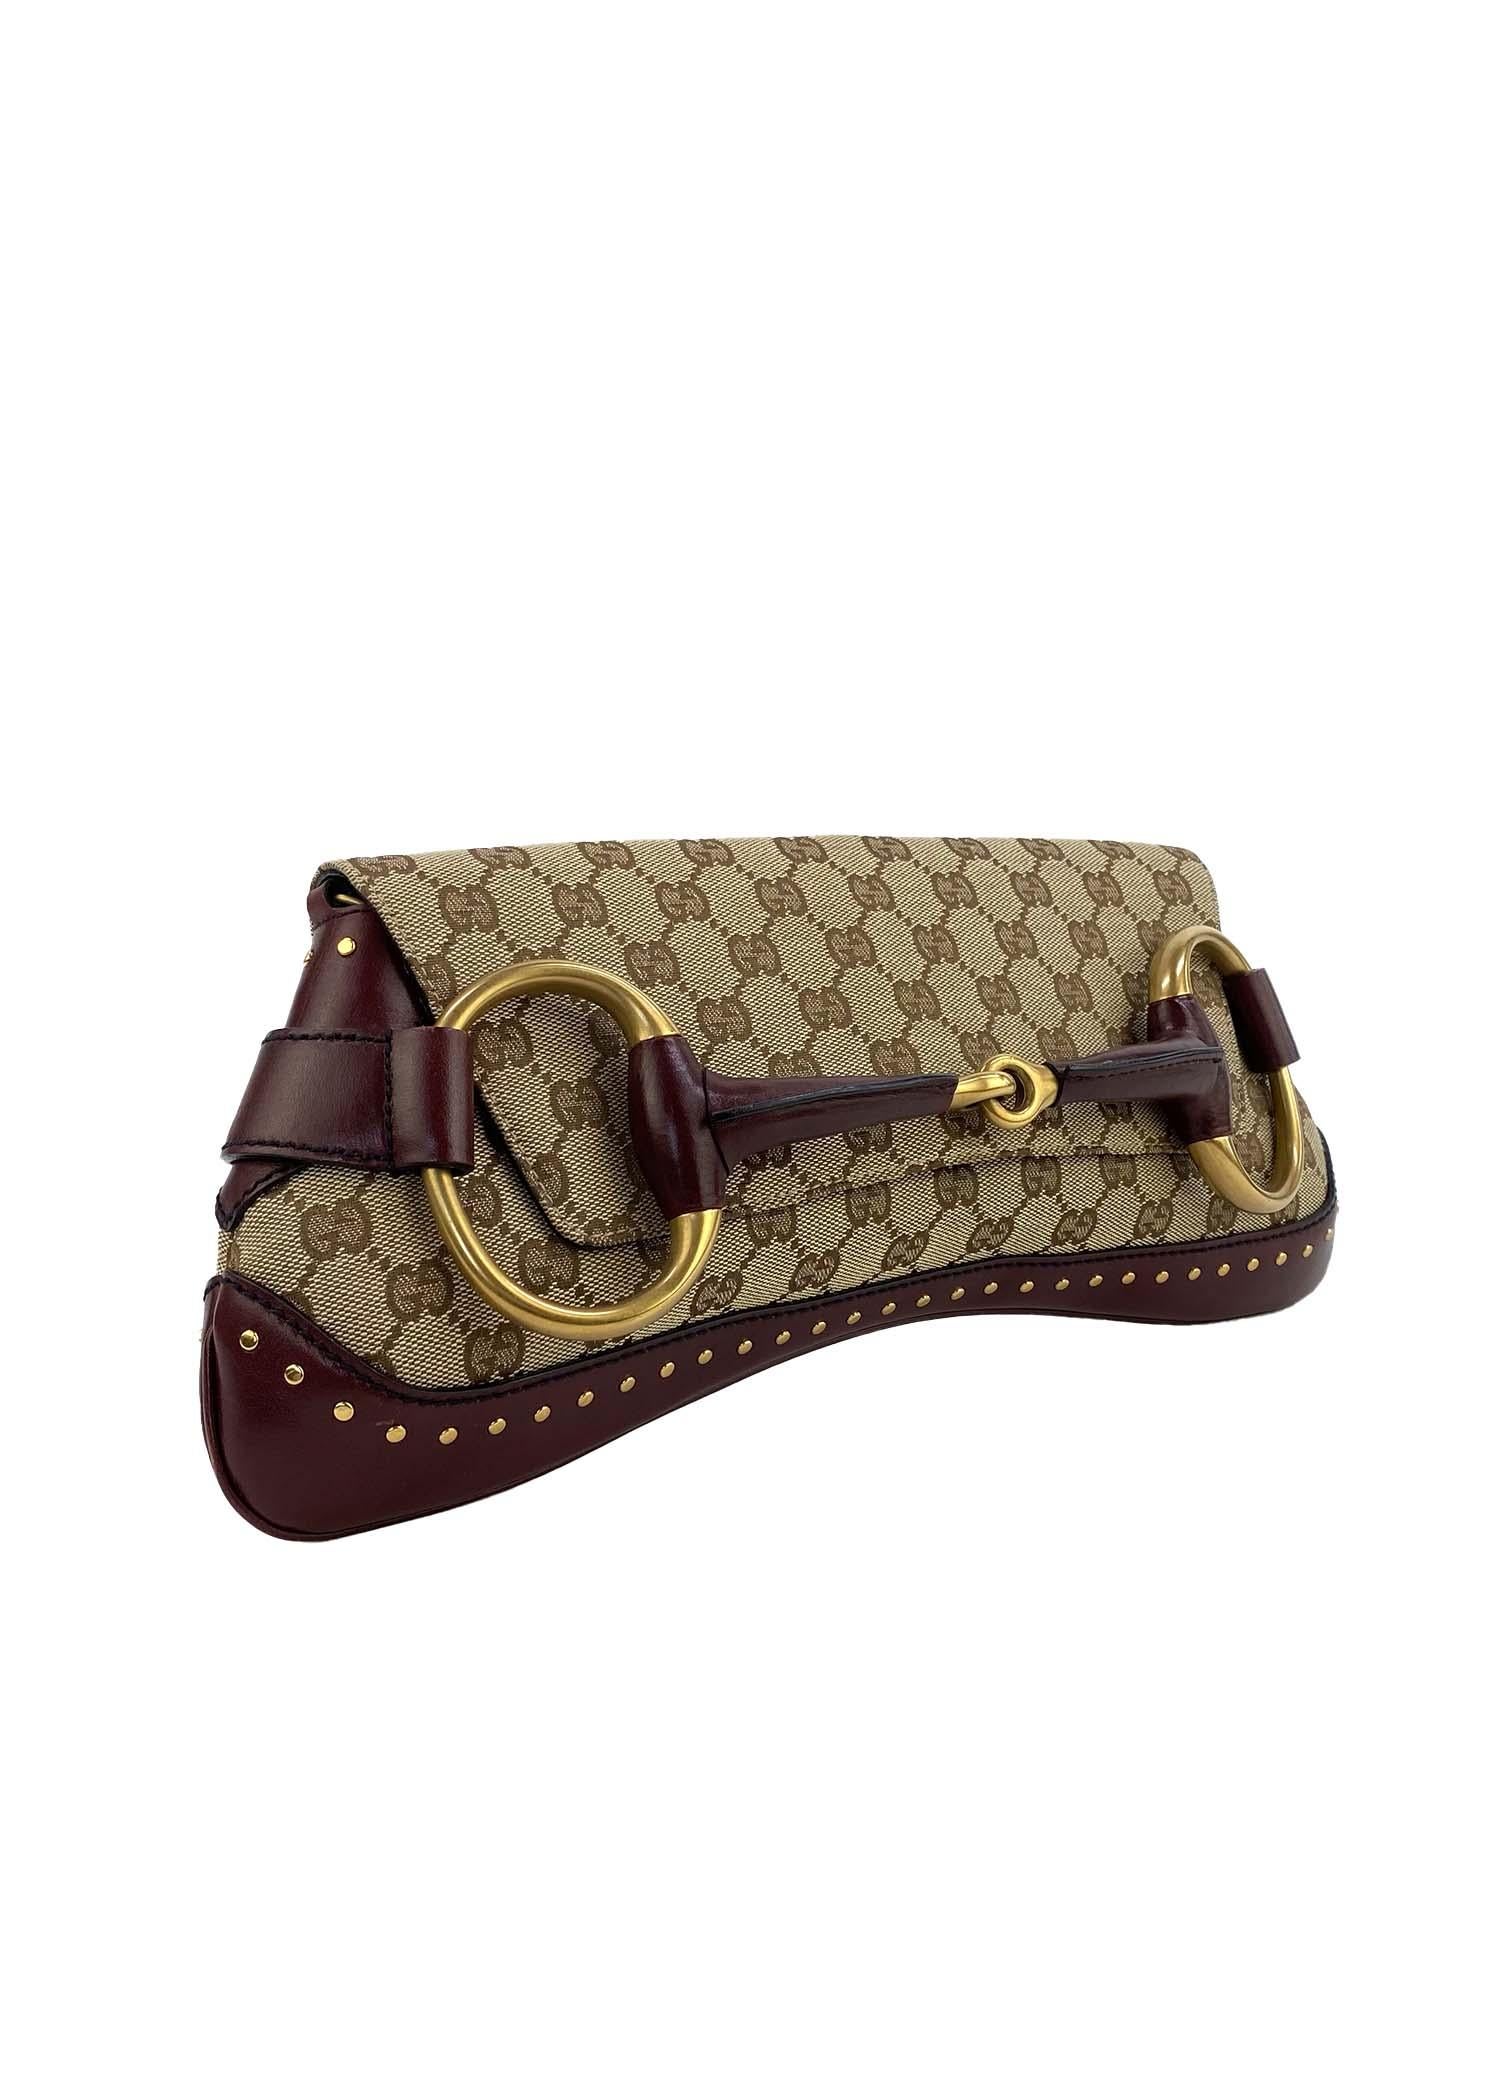 Women's or Men's F/W 2003 Gucci by Tom Ford Studded GG Burgundy Large Horsebit Convertible Clutch